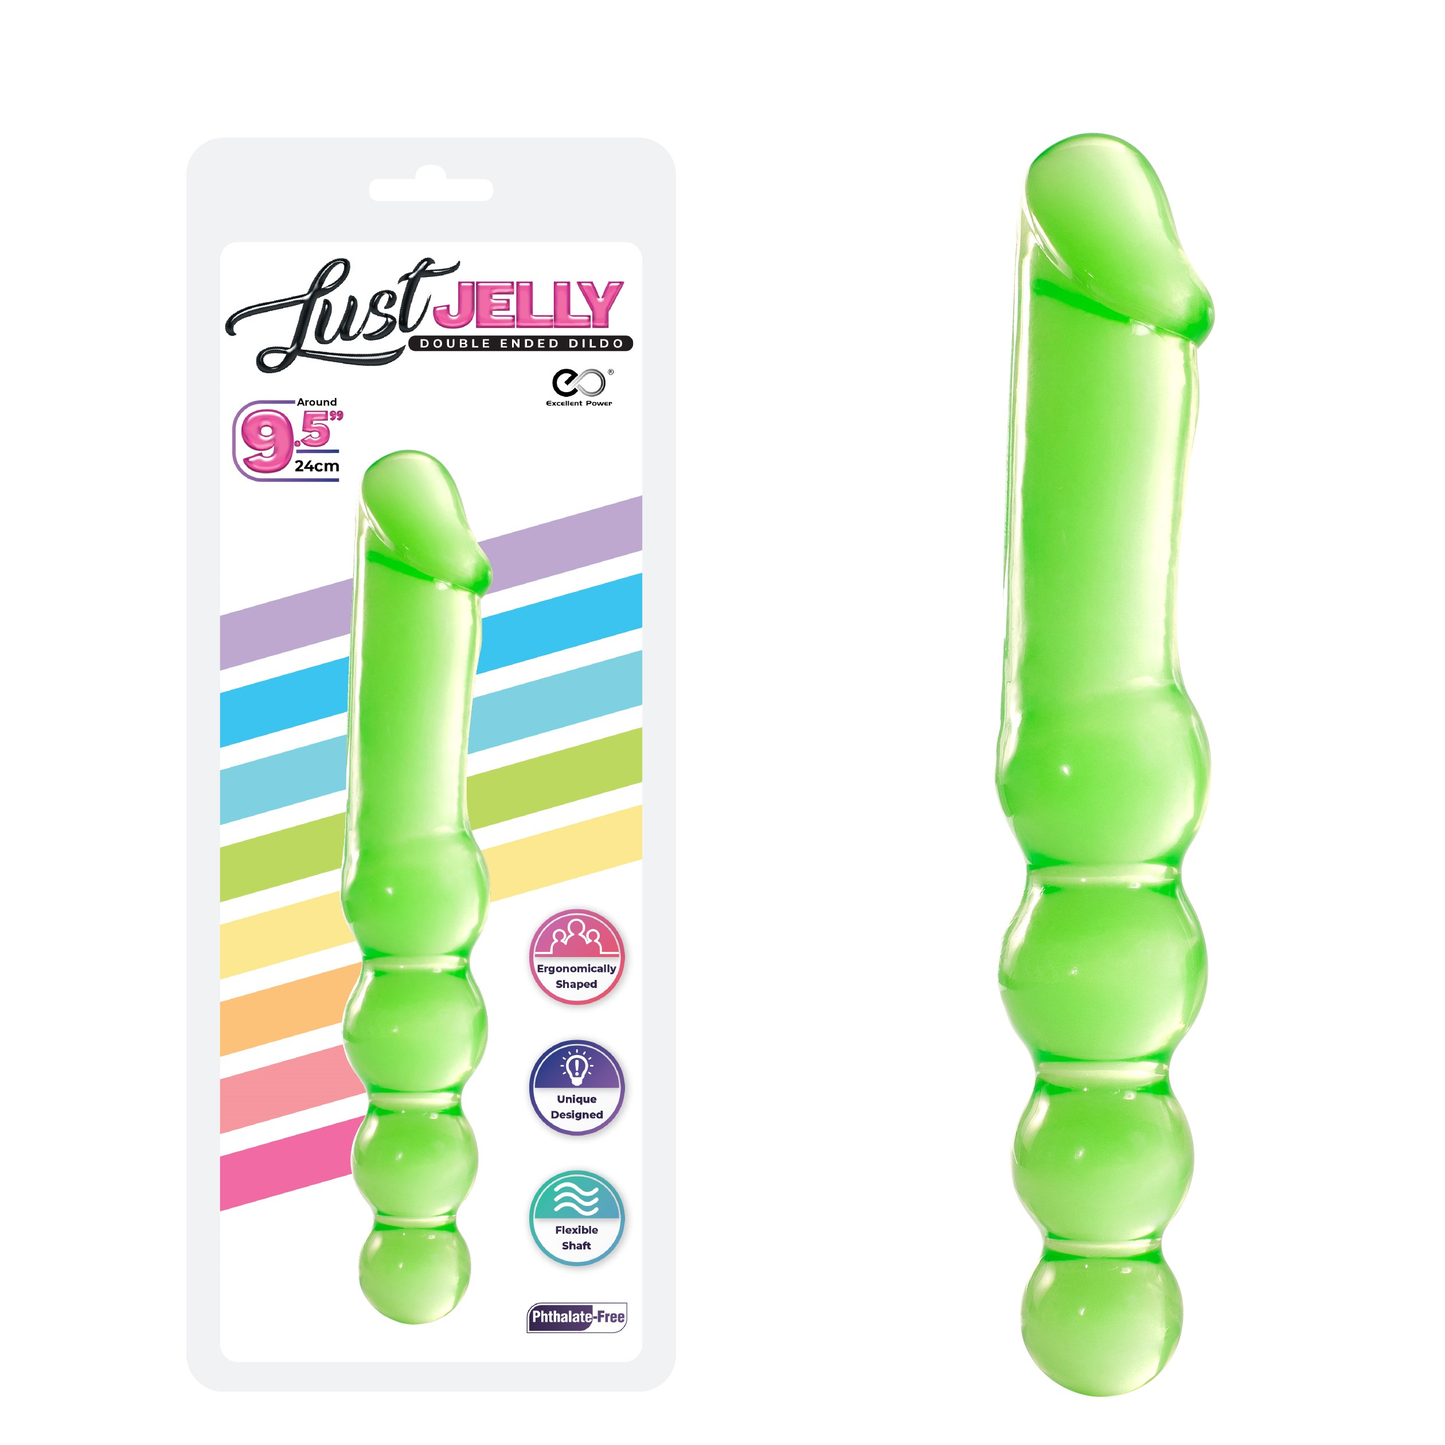 LUST JELLY 9.5 DOUBLE DONG - GREEN - One Stop Adult Shop